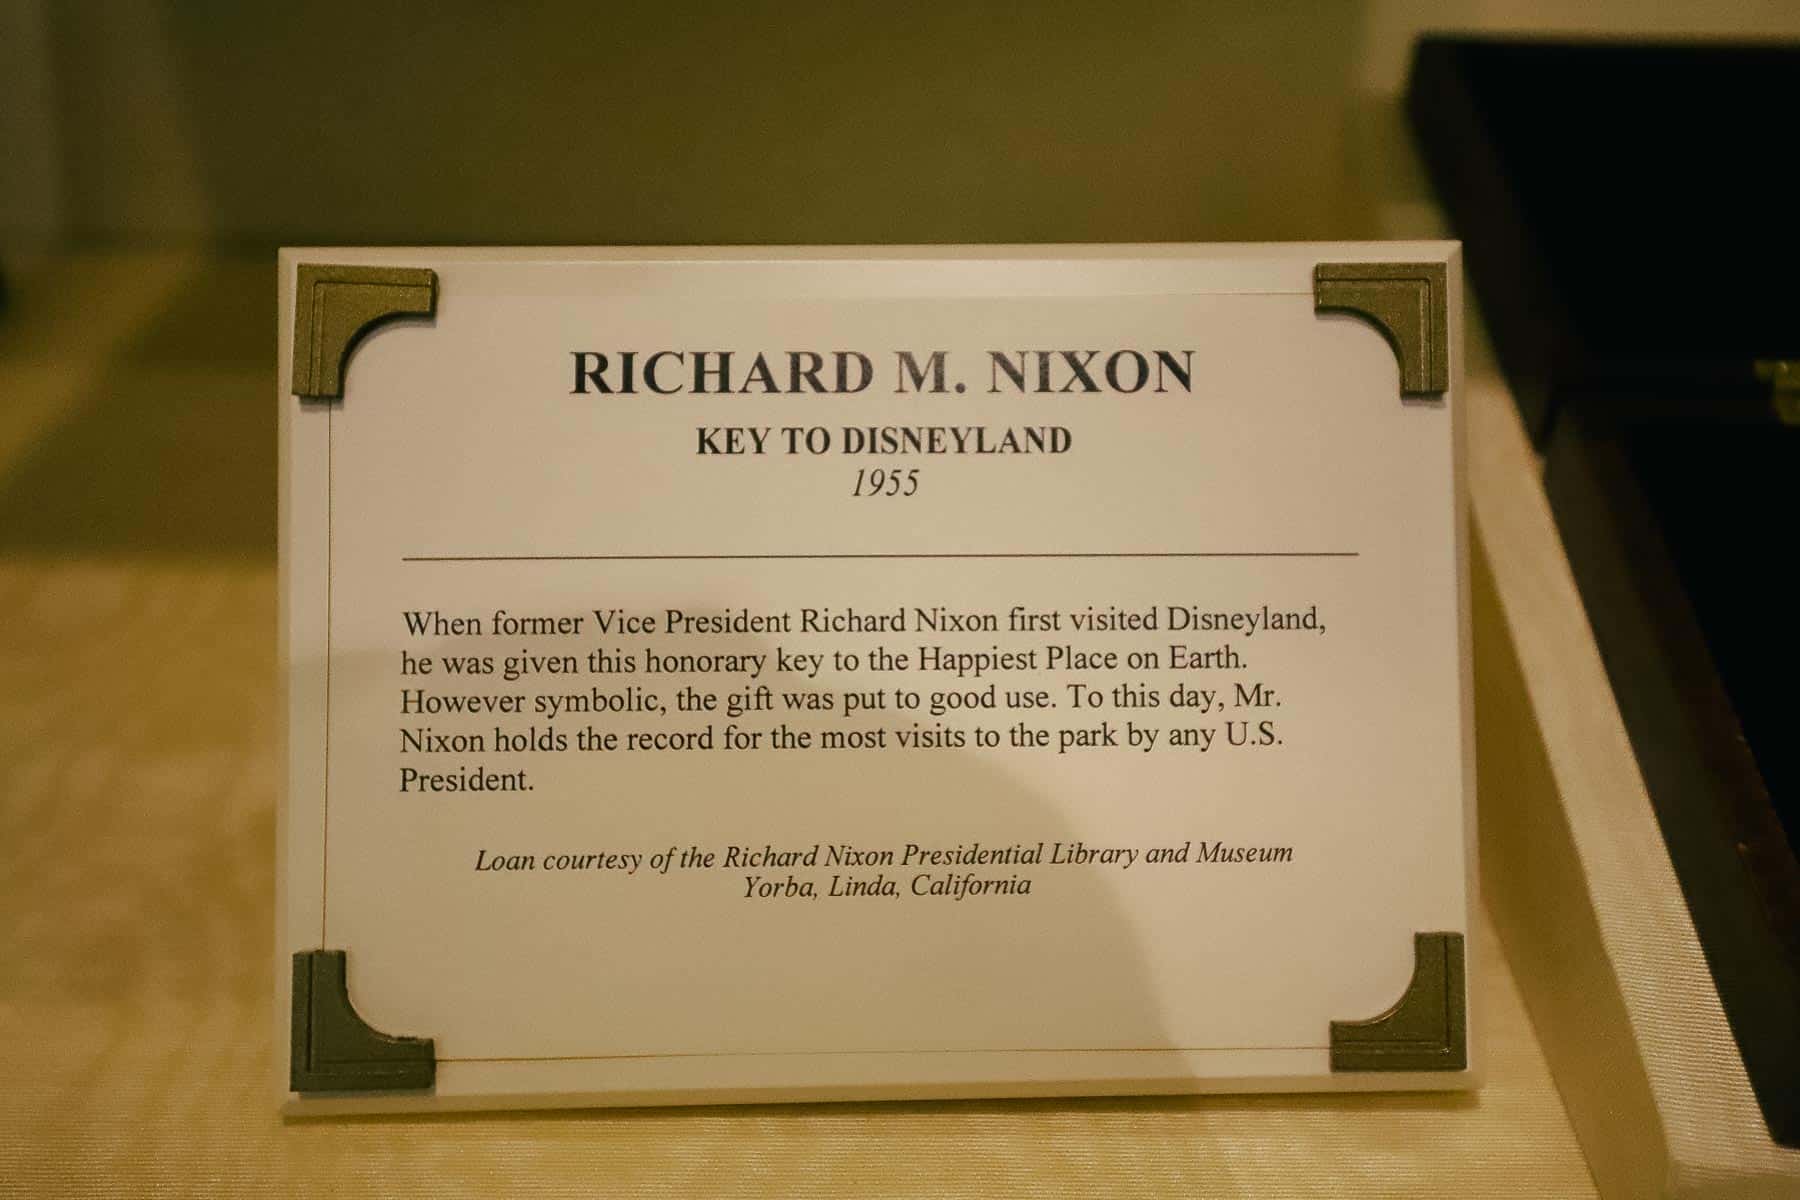 A sign that tells how Richard Nixon visited Disneyland often and held the record for the most visits to the park by any U.S. President. 